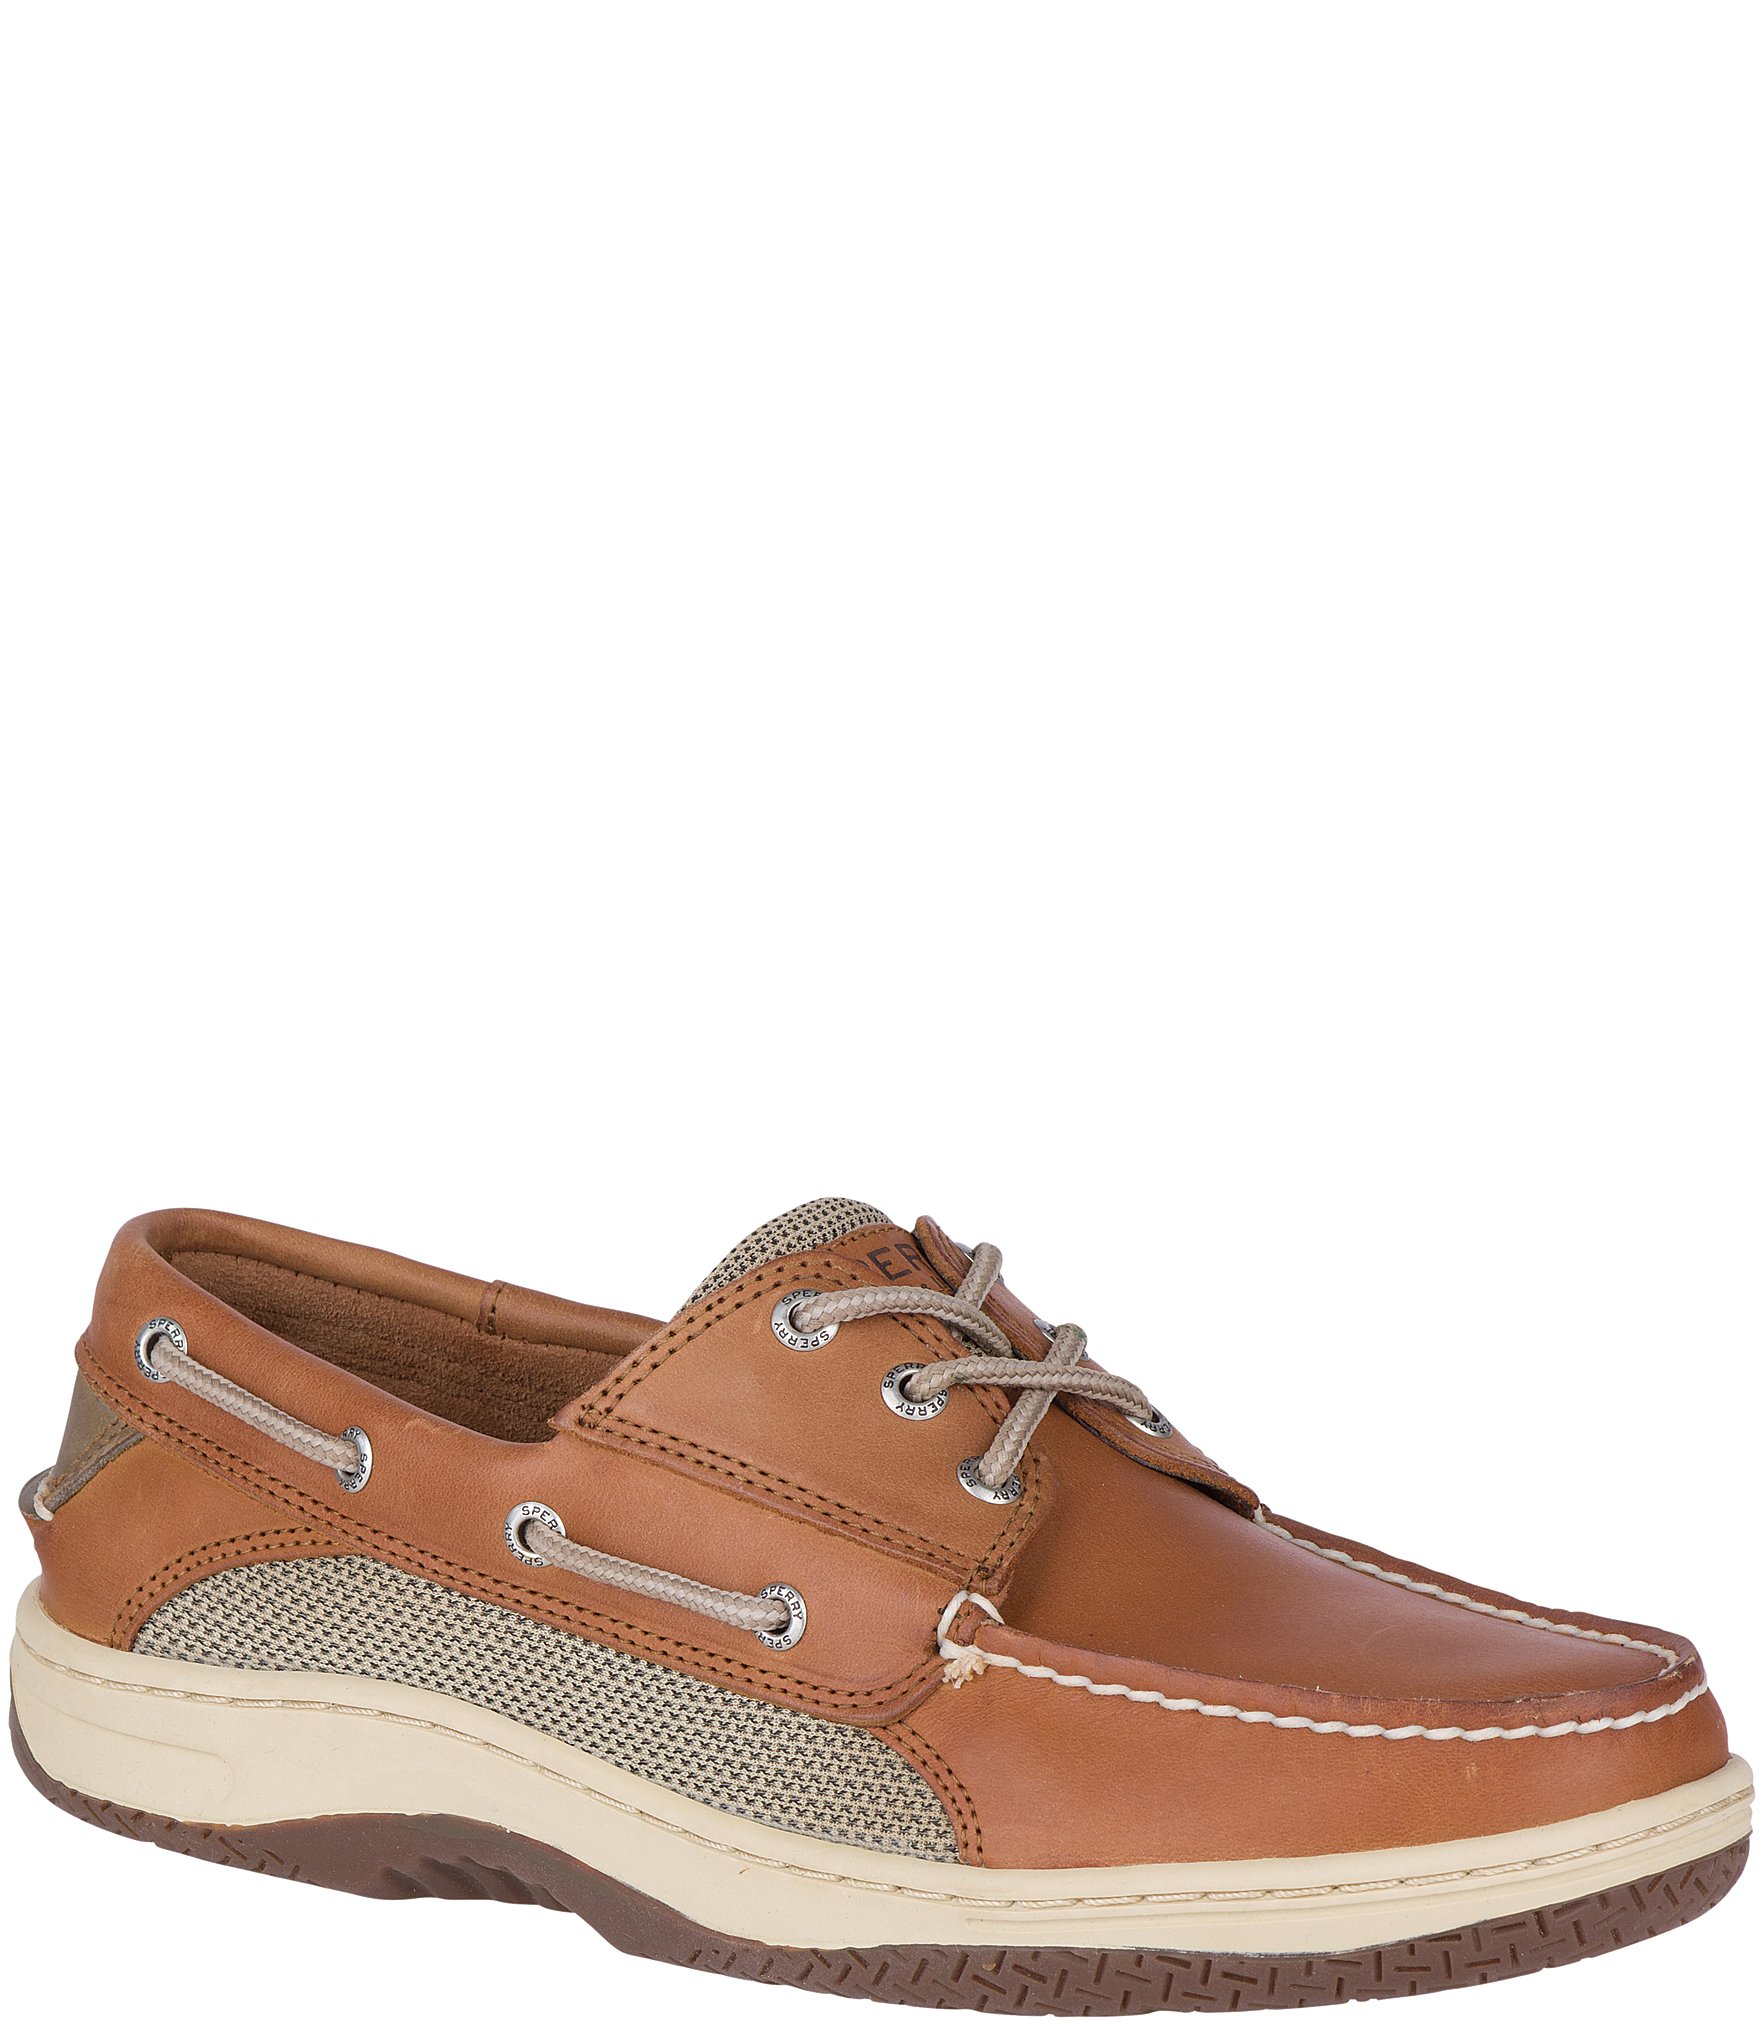 sperry sider boat shoes